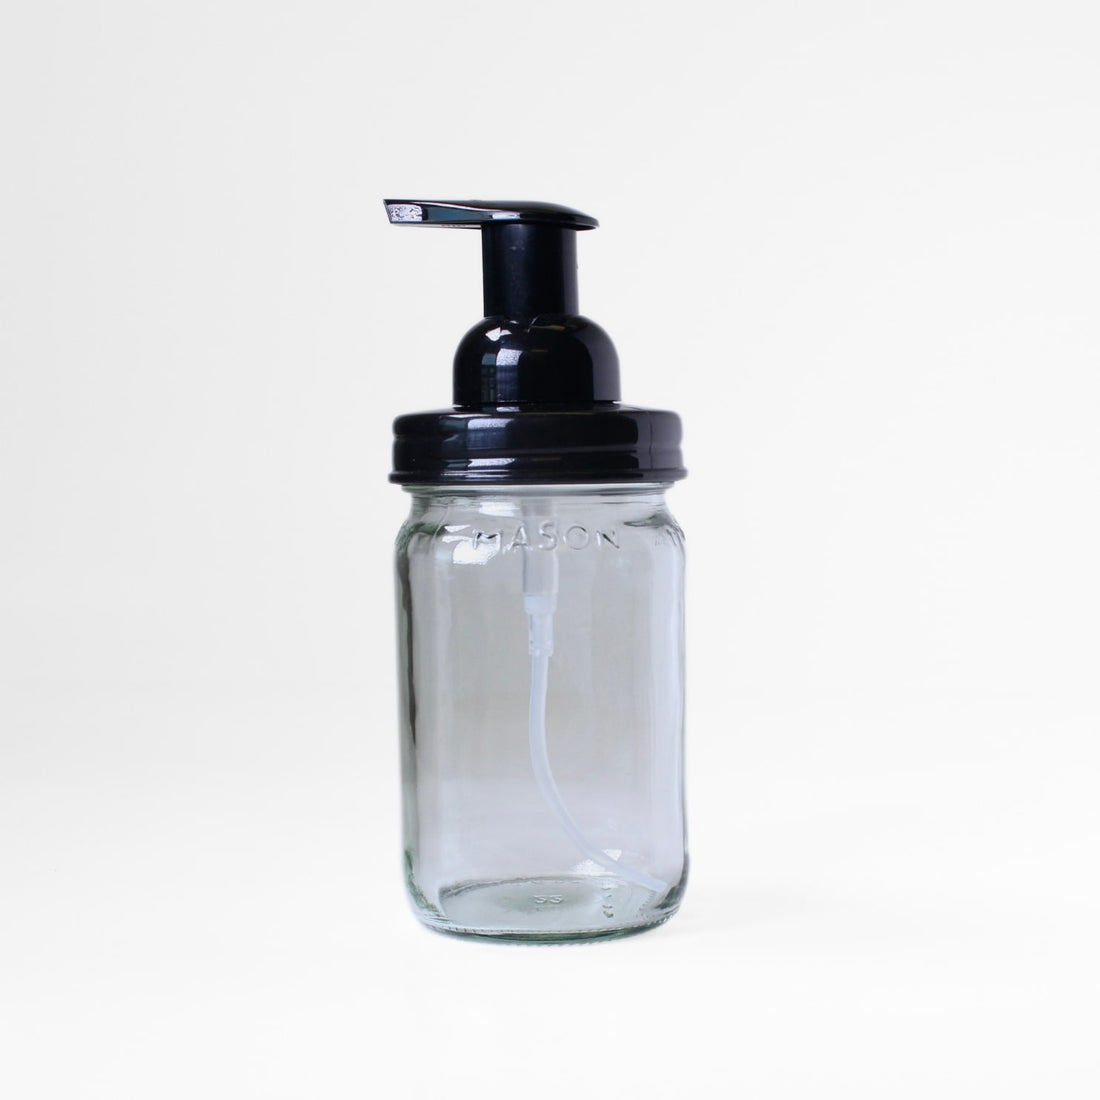 Foaming soap dispenser pump top with jar by etee